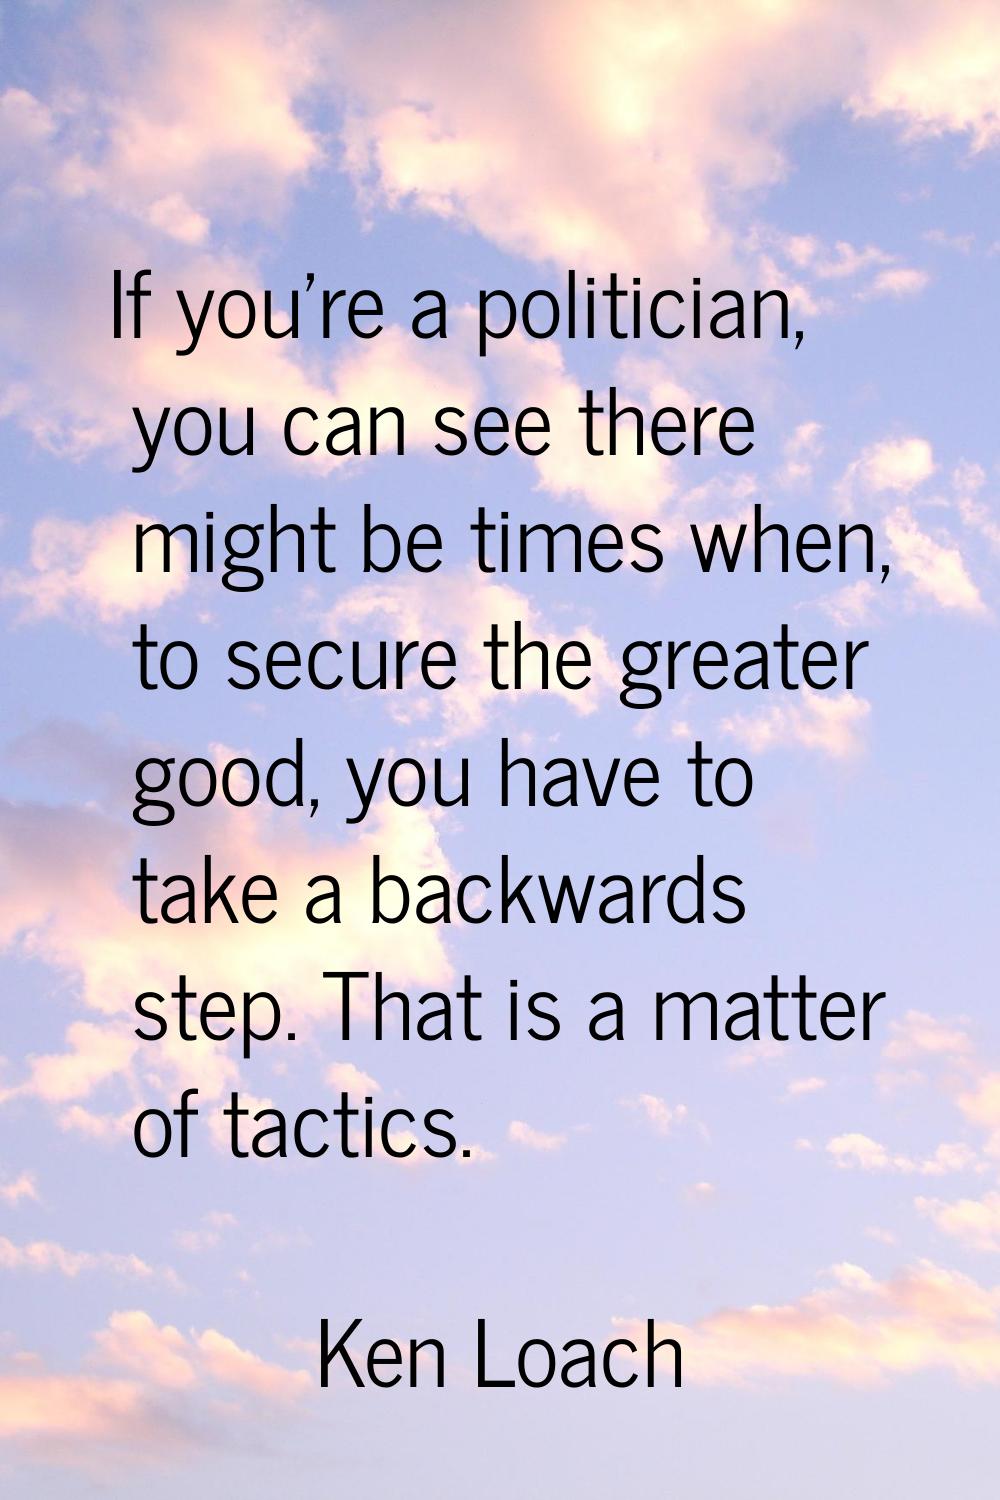 If you're a politician, you can see there might be times when, to secure the greater good, you have